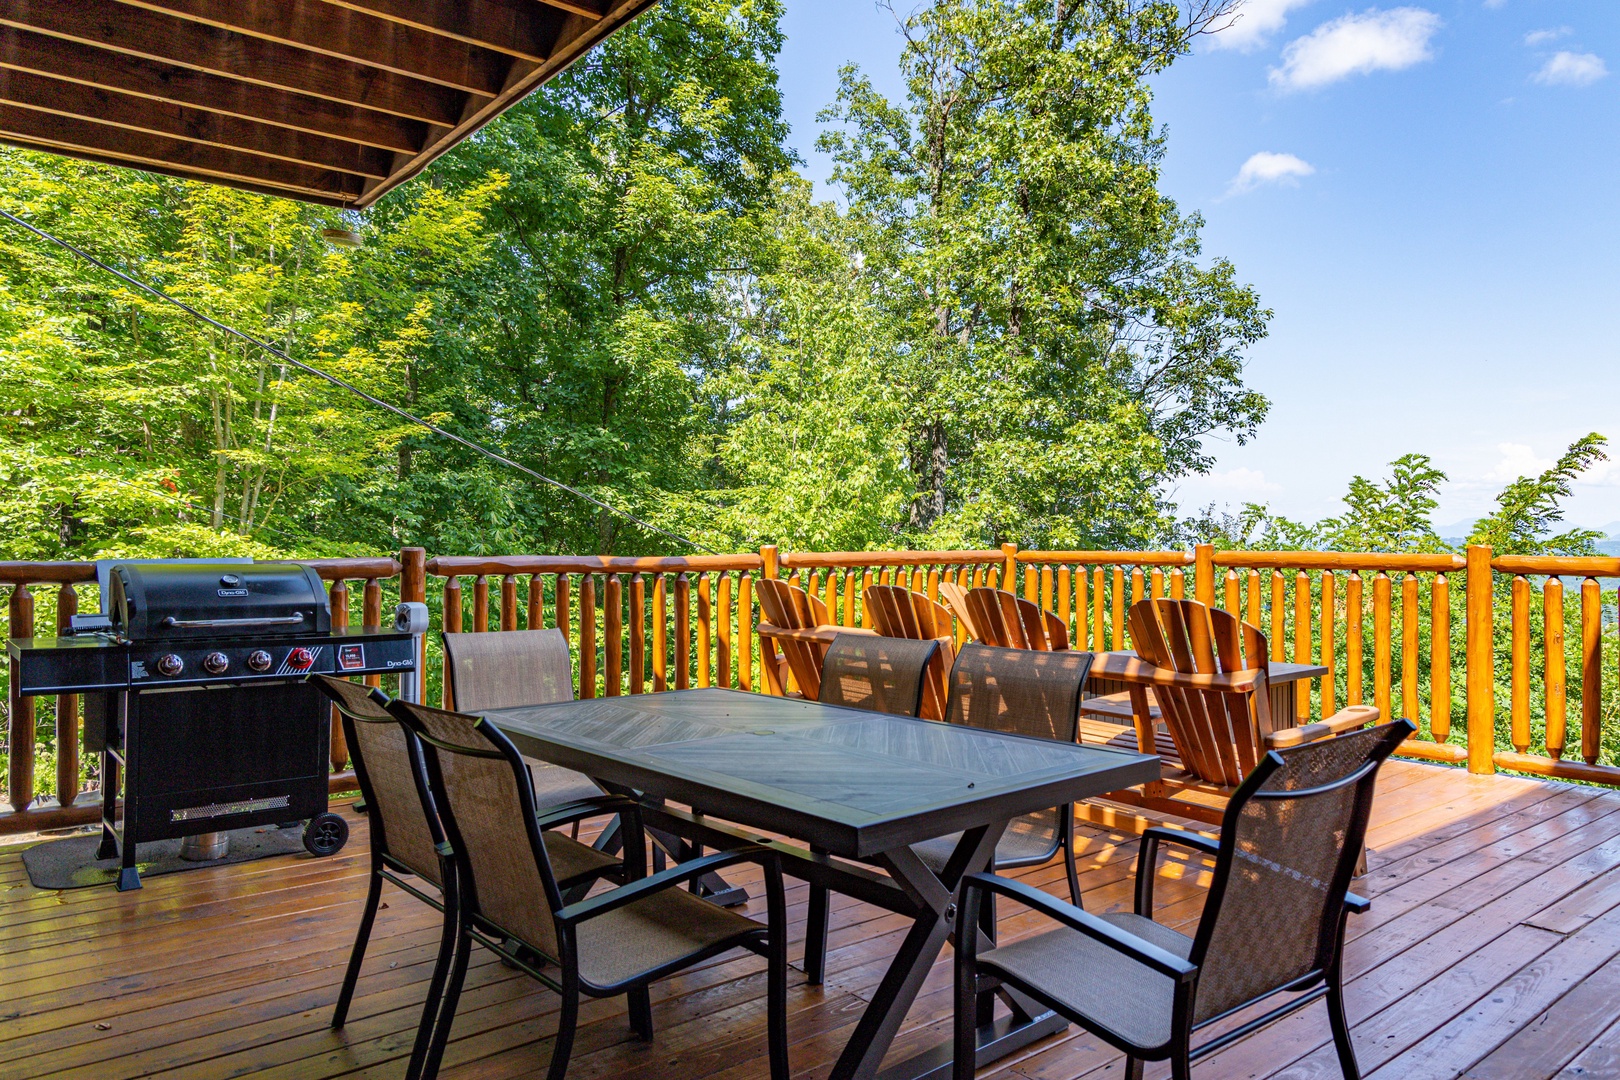 Outdoor grill and dining for 6 at Sky View, A 4 bedroom cabin rental in Pigeon Forge